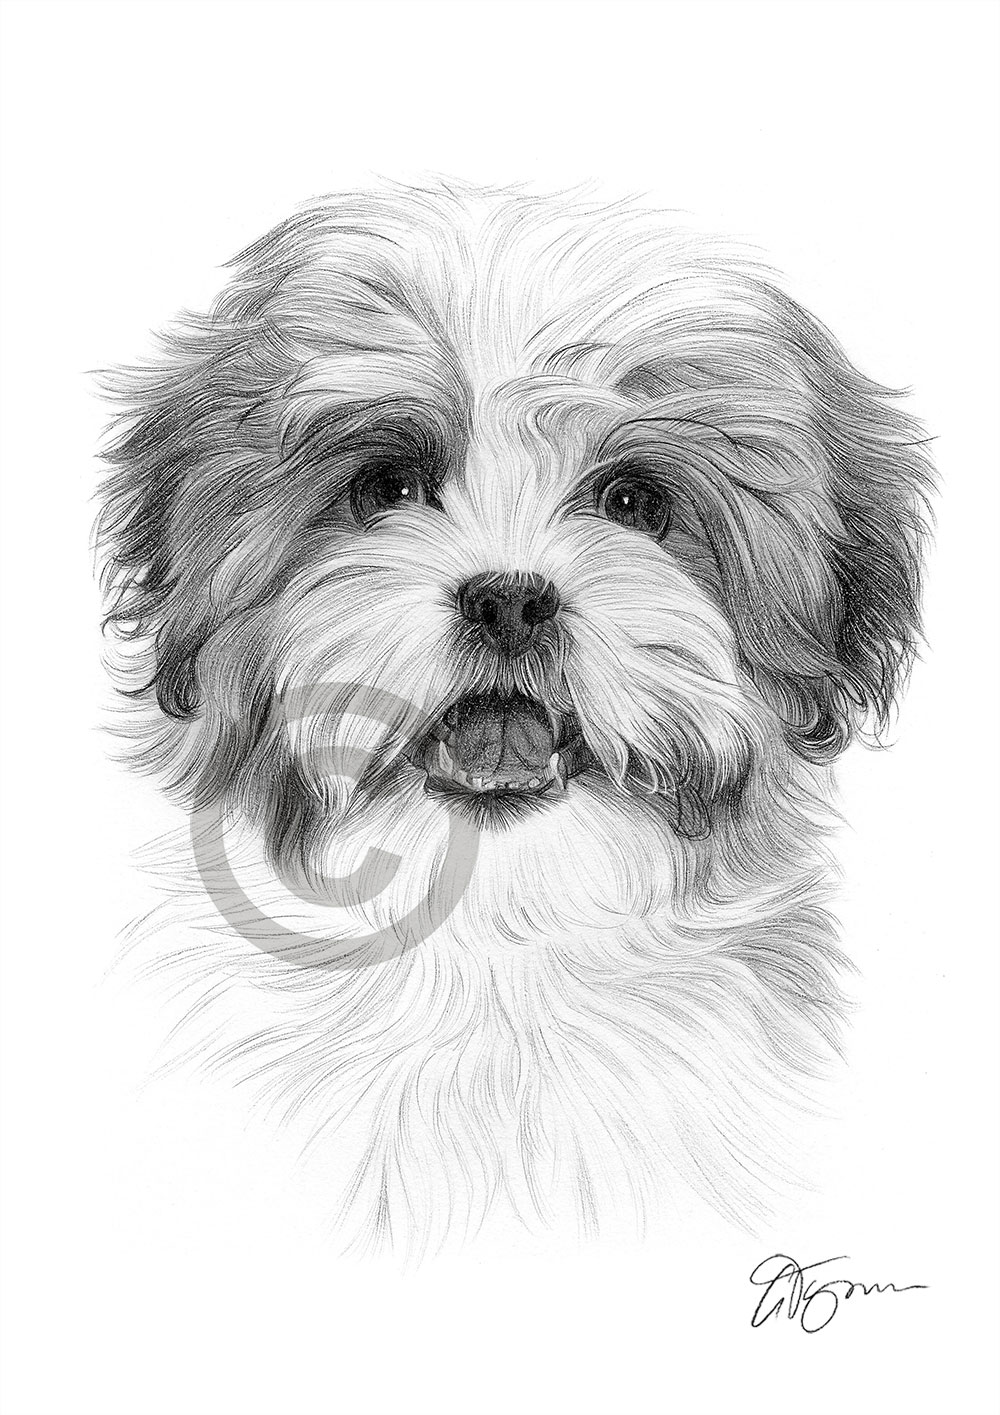 Pencil drawing of a young Shih Tzu by artist Gary Tymon